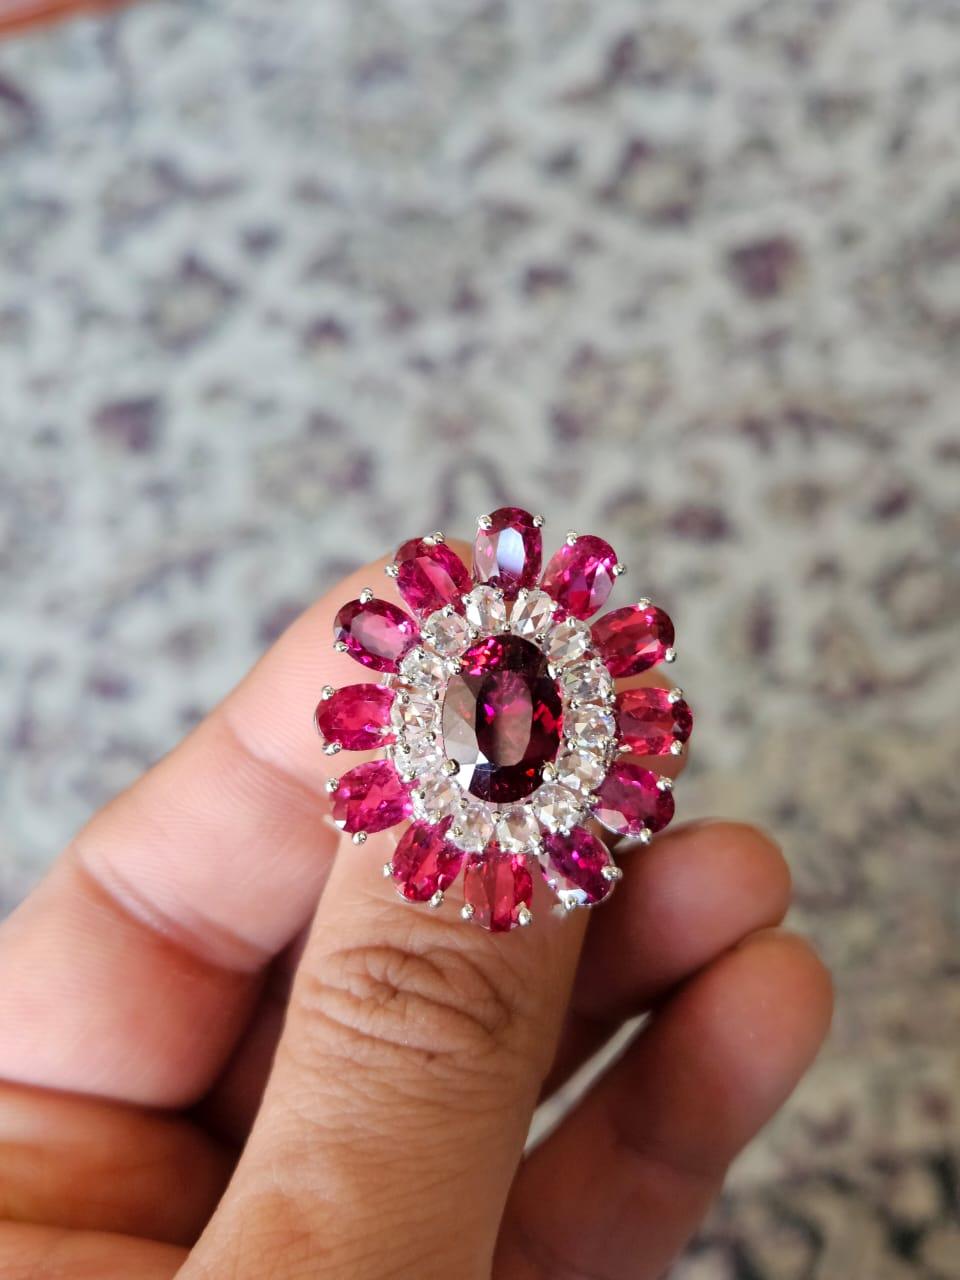 A very beautiful and modern, Rubellite Cocktail Ring set in 18K White Gold & Diamonds. The combined weight of the Rubellites is 14.42 carats. The Diamonds weight is 1.35 carats. Net 18K Gold weight is 7.59 grams. The gross weight of the ring is